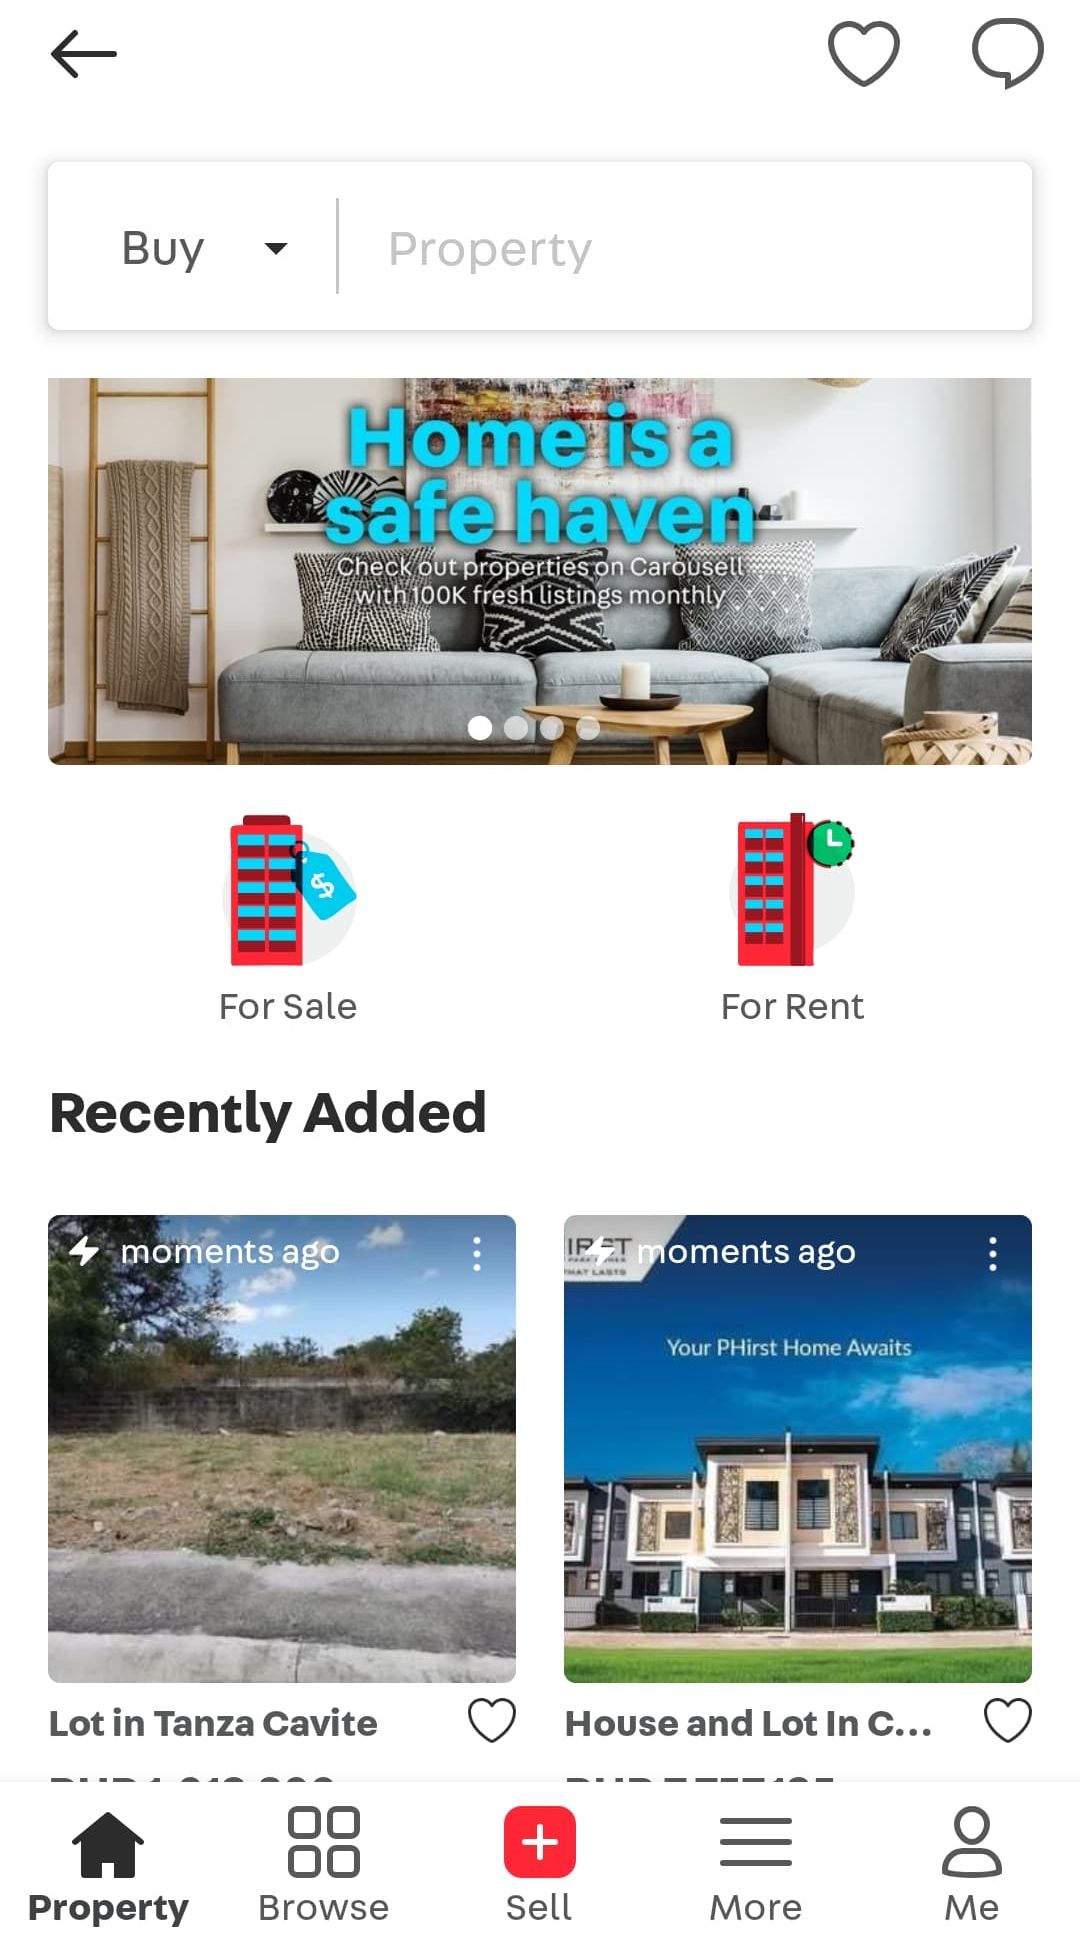 Sell your property on Carousell to reach more potential buyers - Carousell Philippines Blog